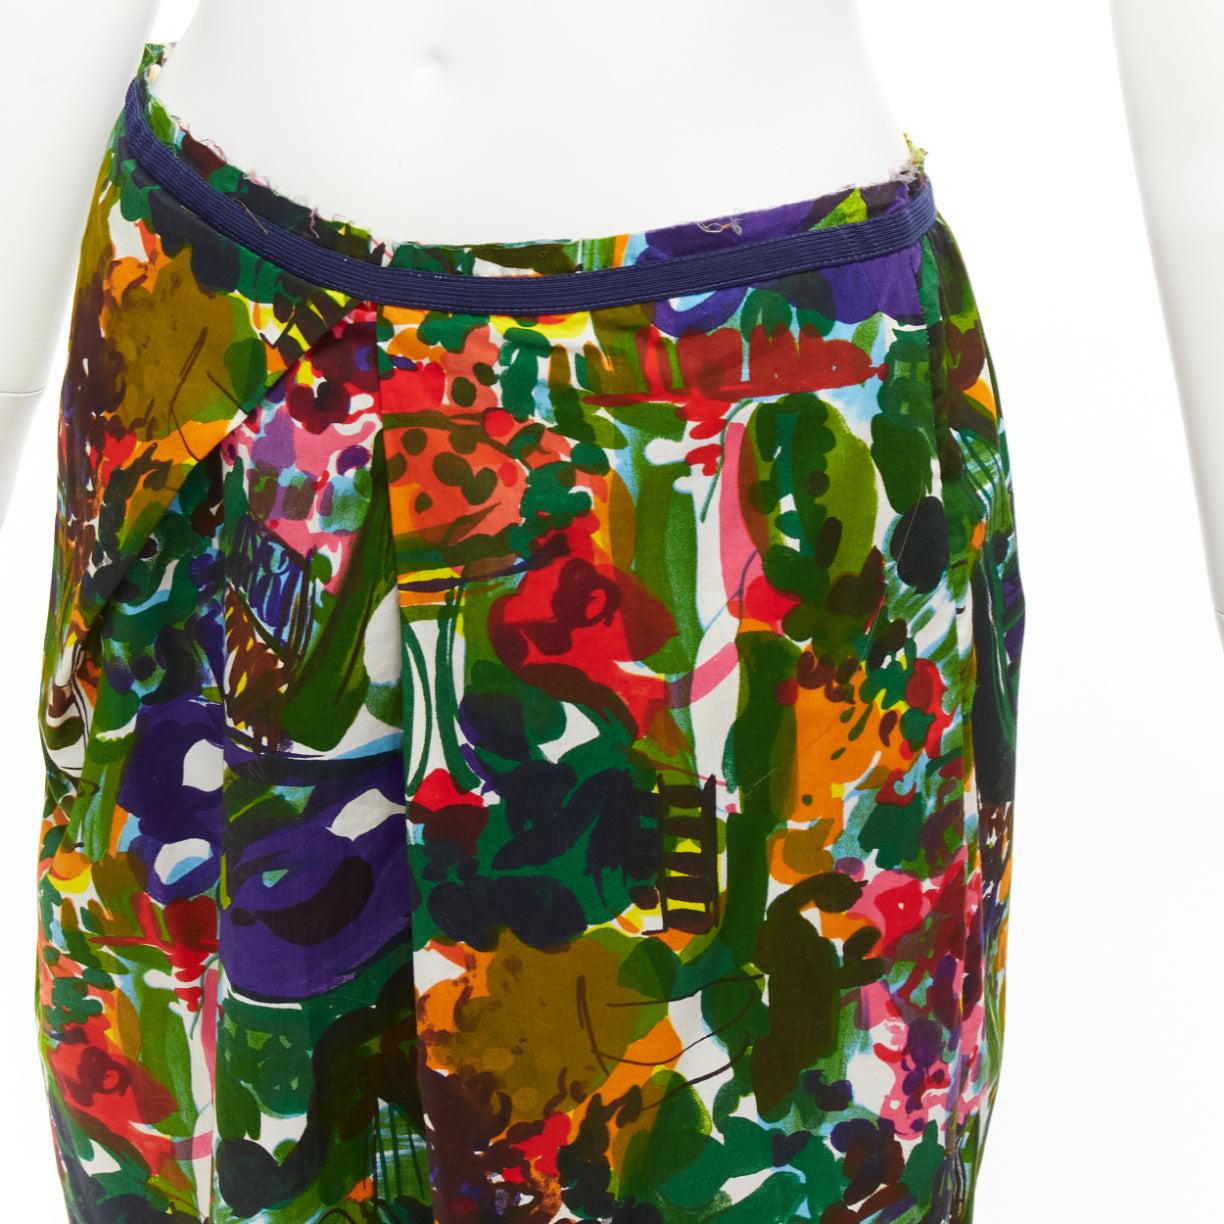 MARNI purple multicolor floral cotton inverted pleat front knee skirt IT38 XS
Reference: NKLL/A00222
Brand: Marni
Material: Cotton
Color: Multicolour
Pattern: Abstract
Closure: Elasticated
Extra Details: Inverted pleat front.
Made in: